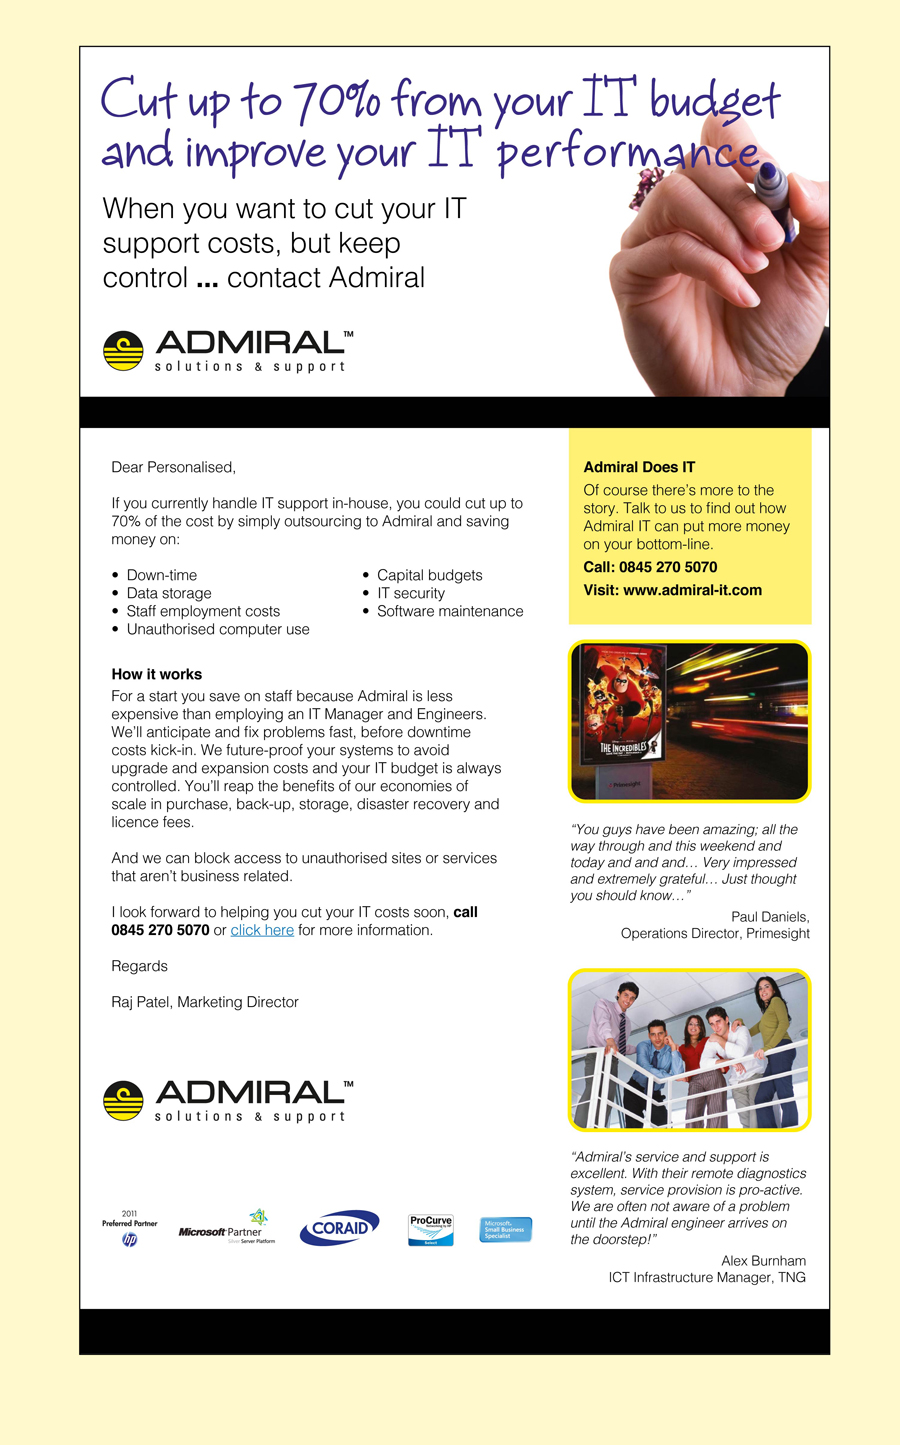 Admiral - IT solutions